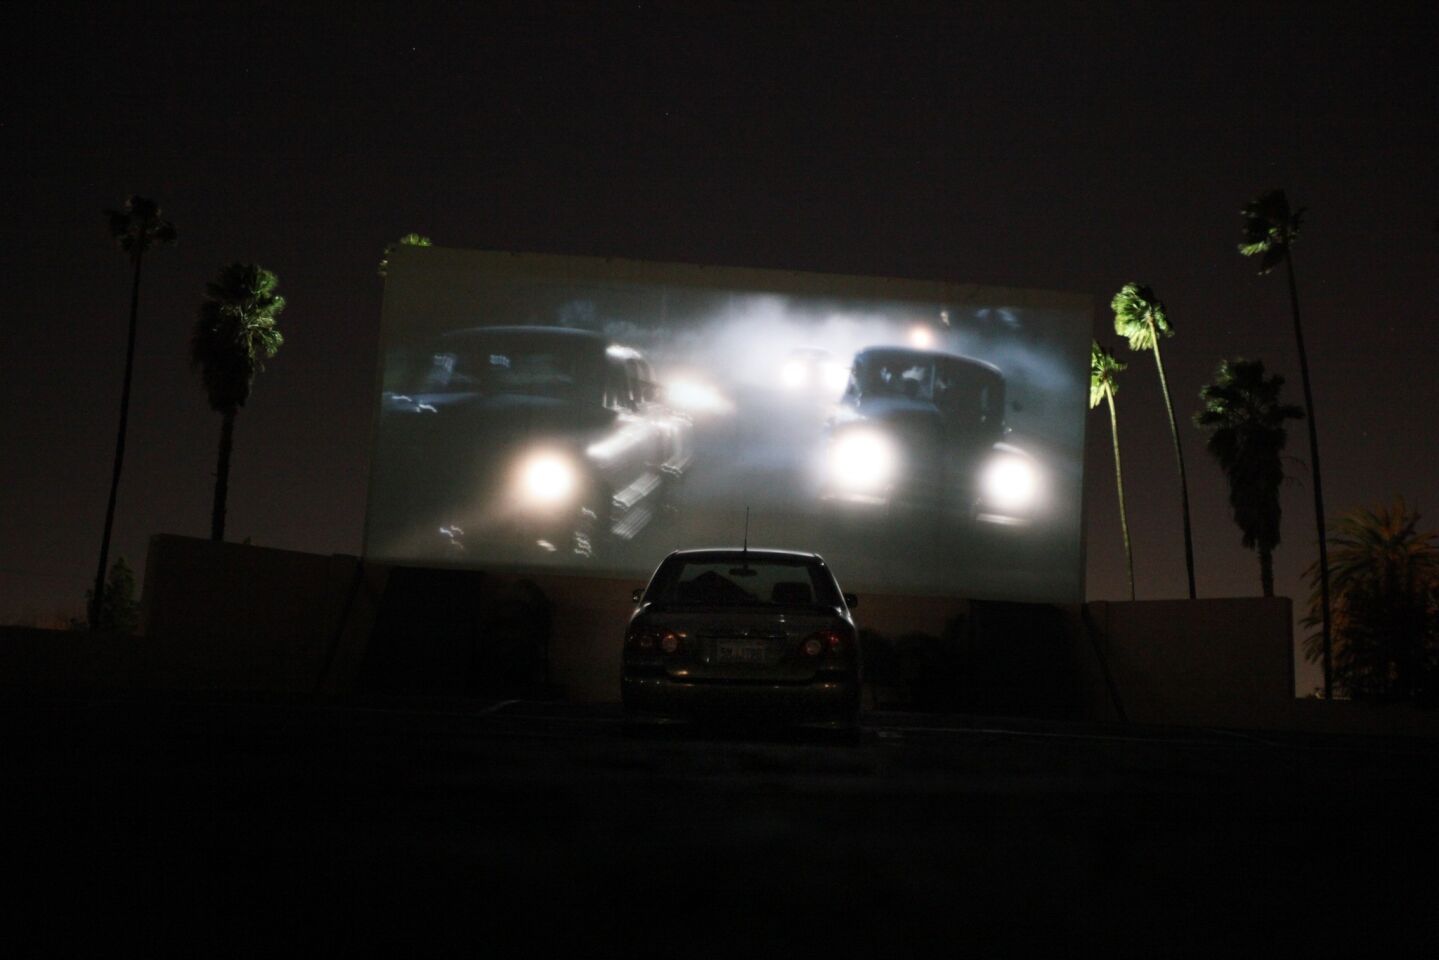 "Gangster Squad" plays at the uncrowded Rubidoux Drive-In Theatre.